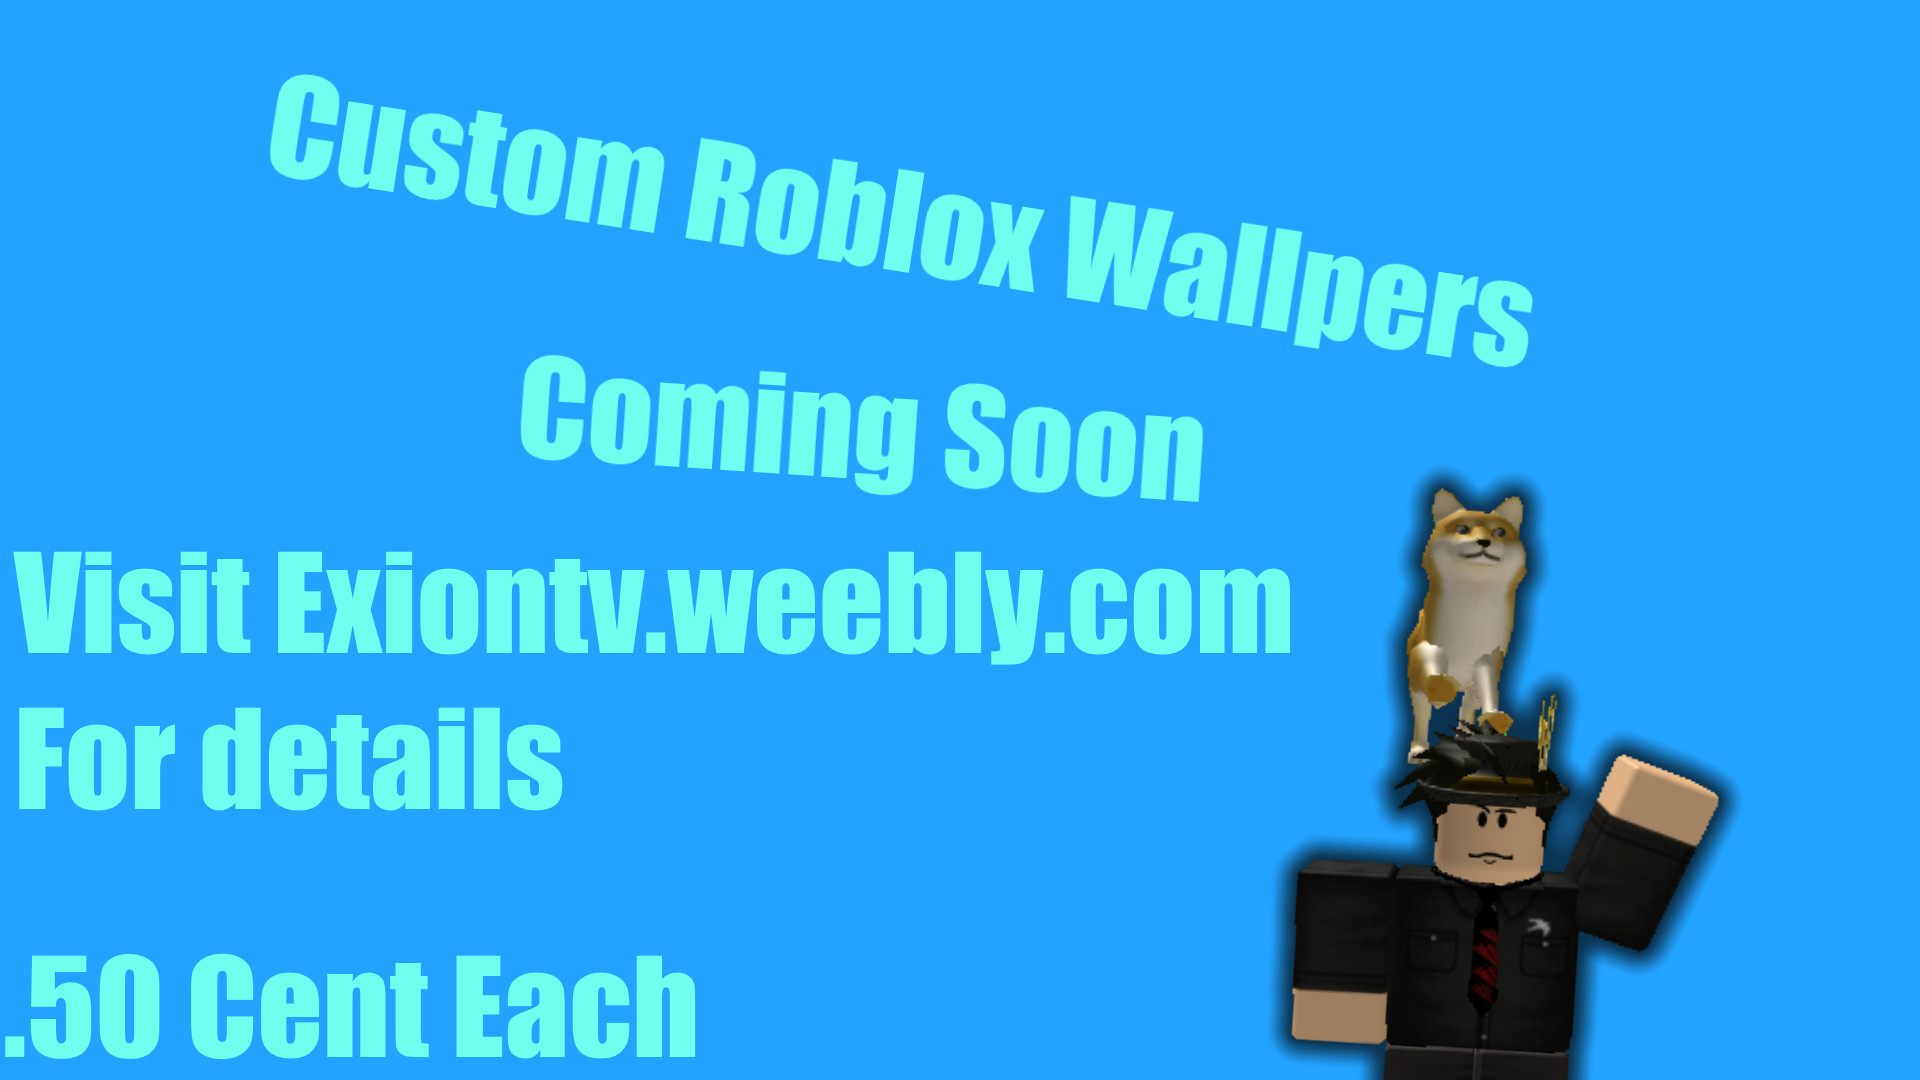 1920x1080 0 Cool Roblox Wallpaper Custom Roblox Wallpapers Coming Soon by ExionTV on  DeviantA